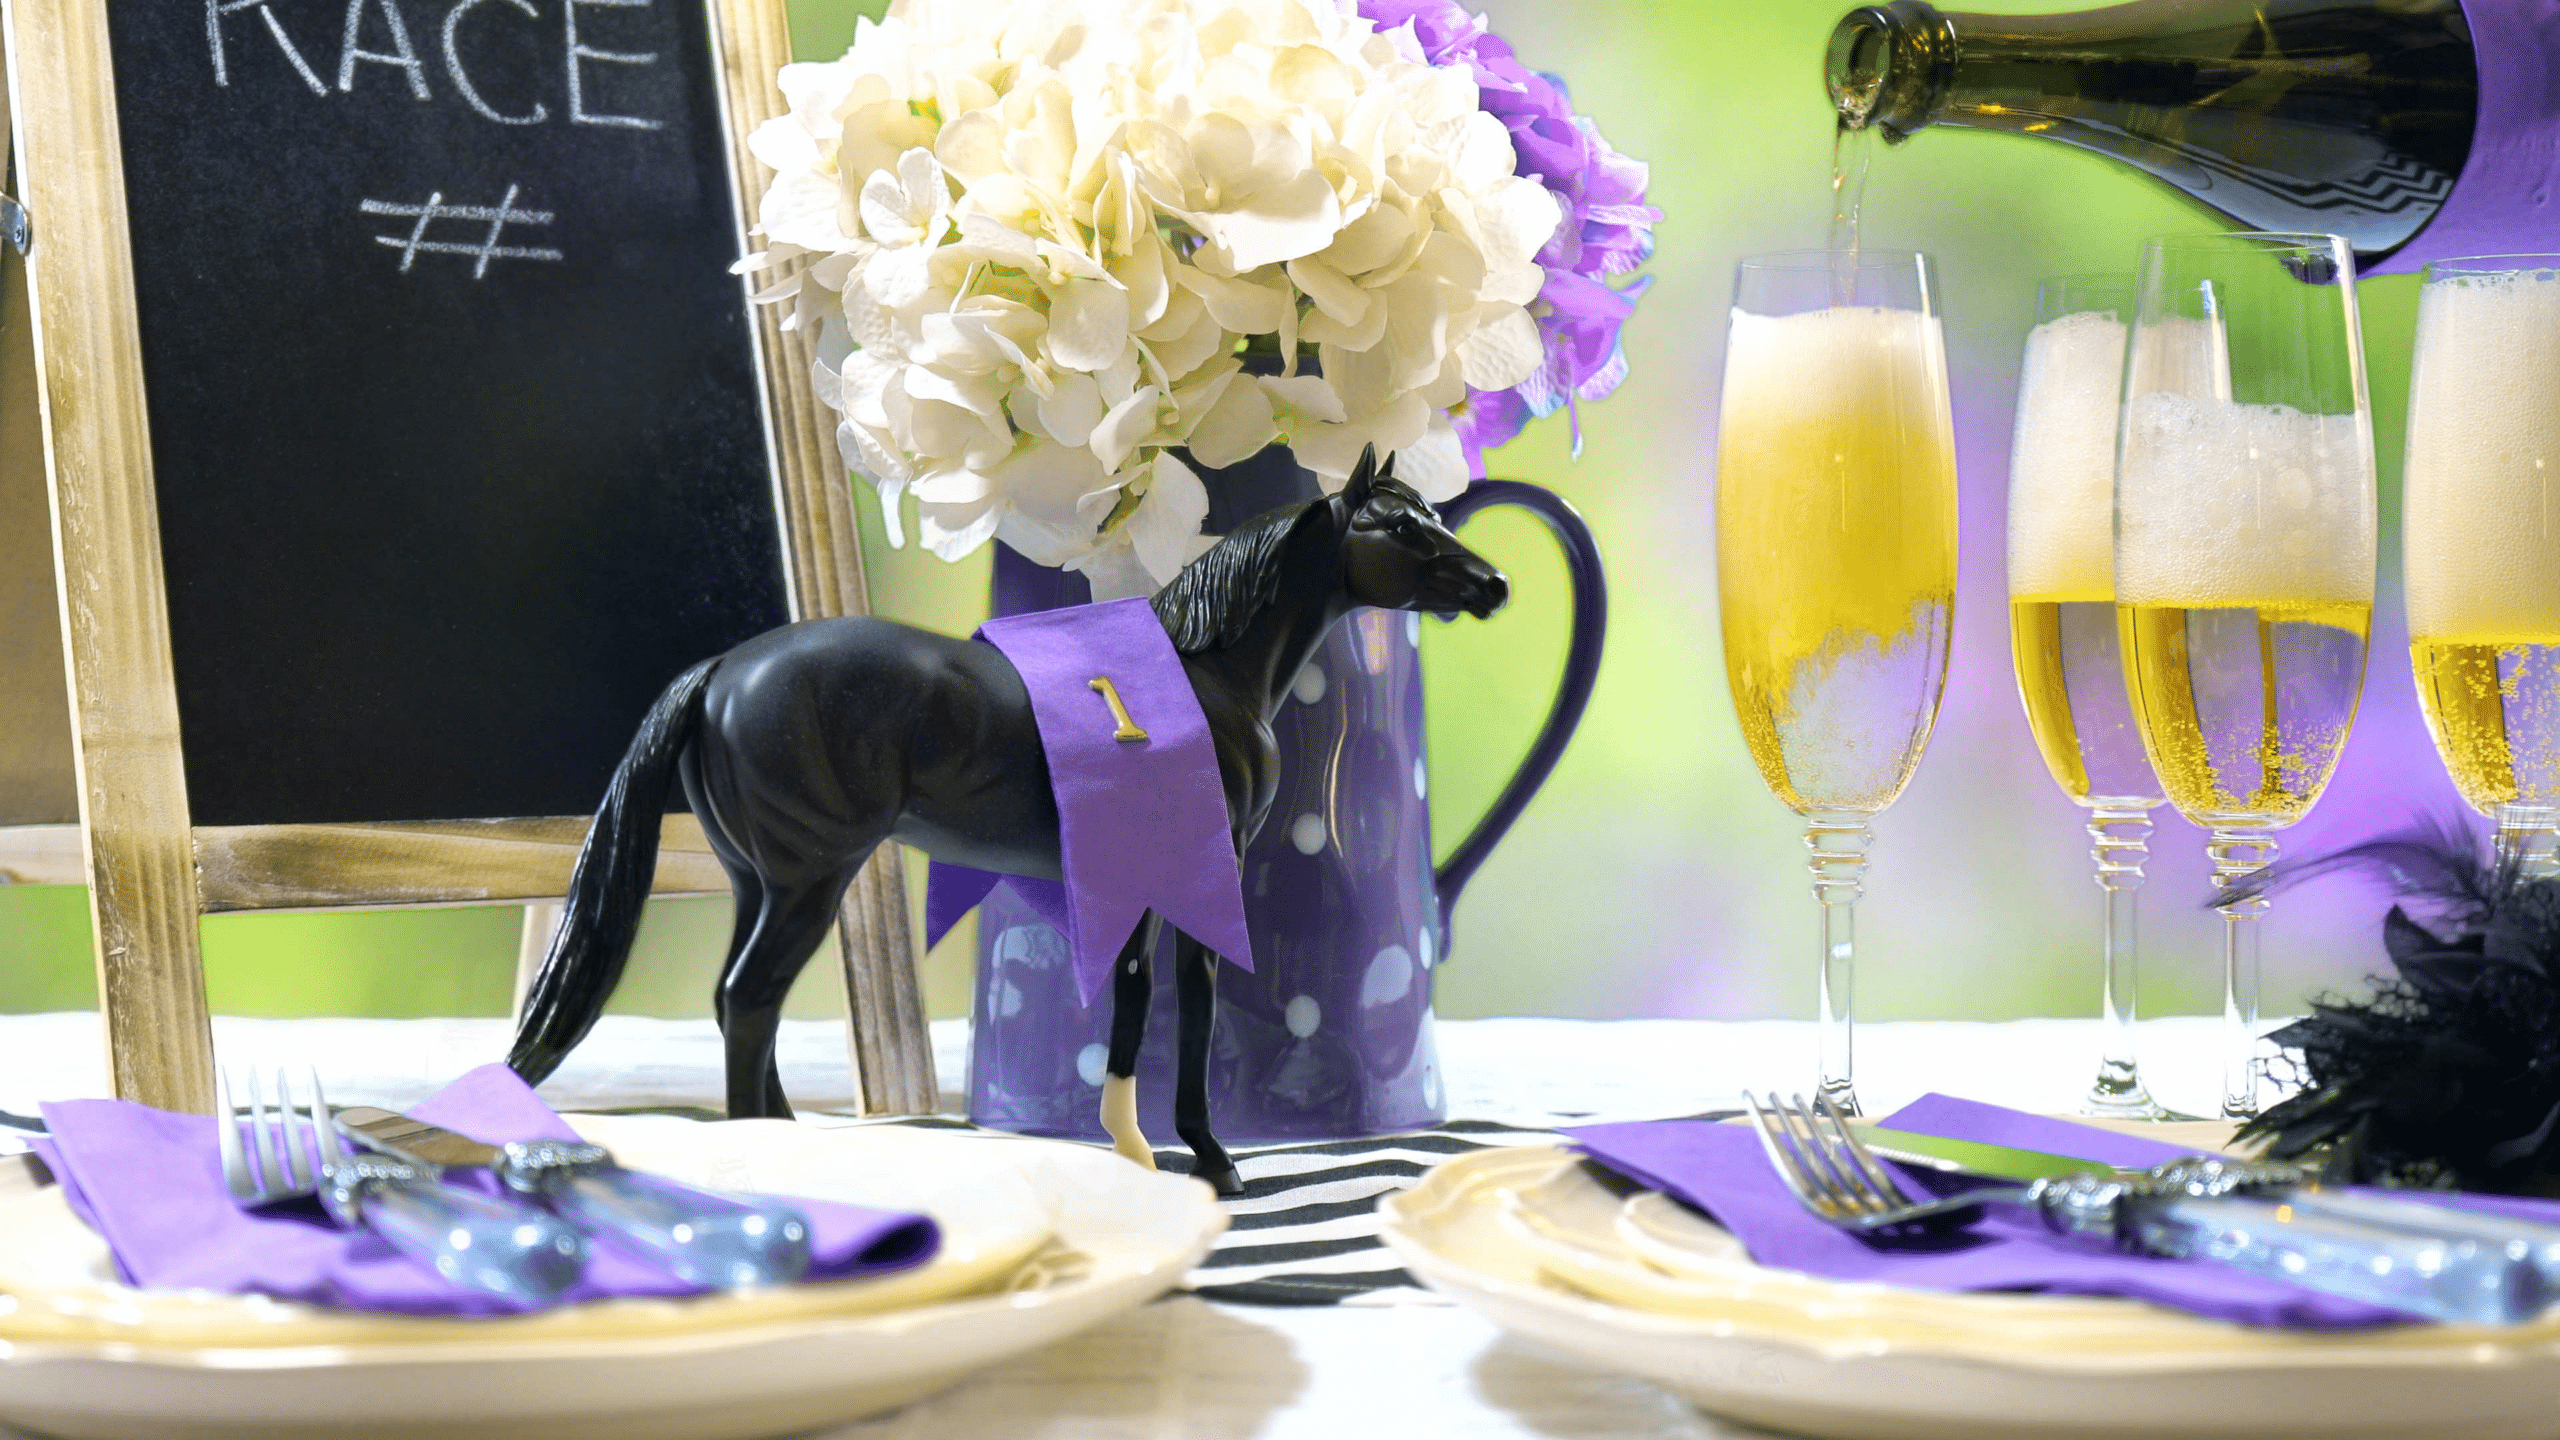 A table with party decorations of horses and purple ribbons